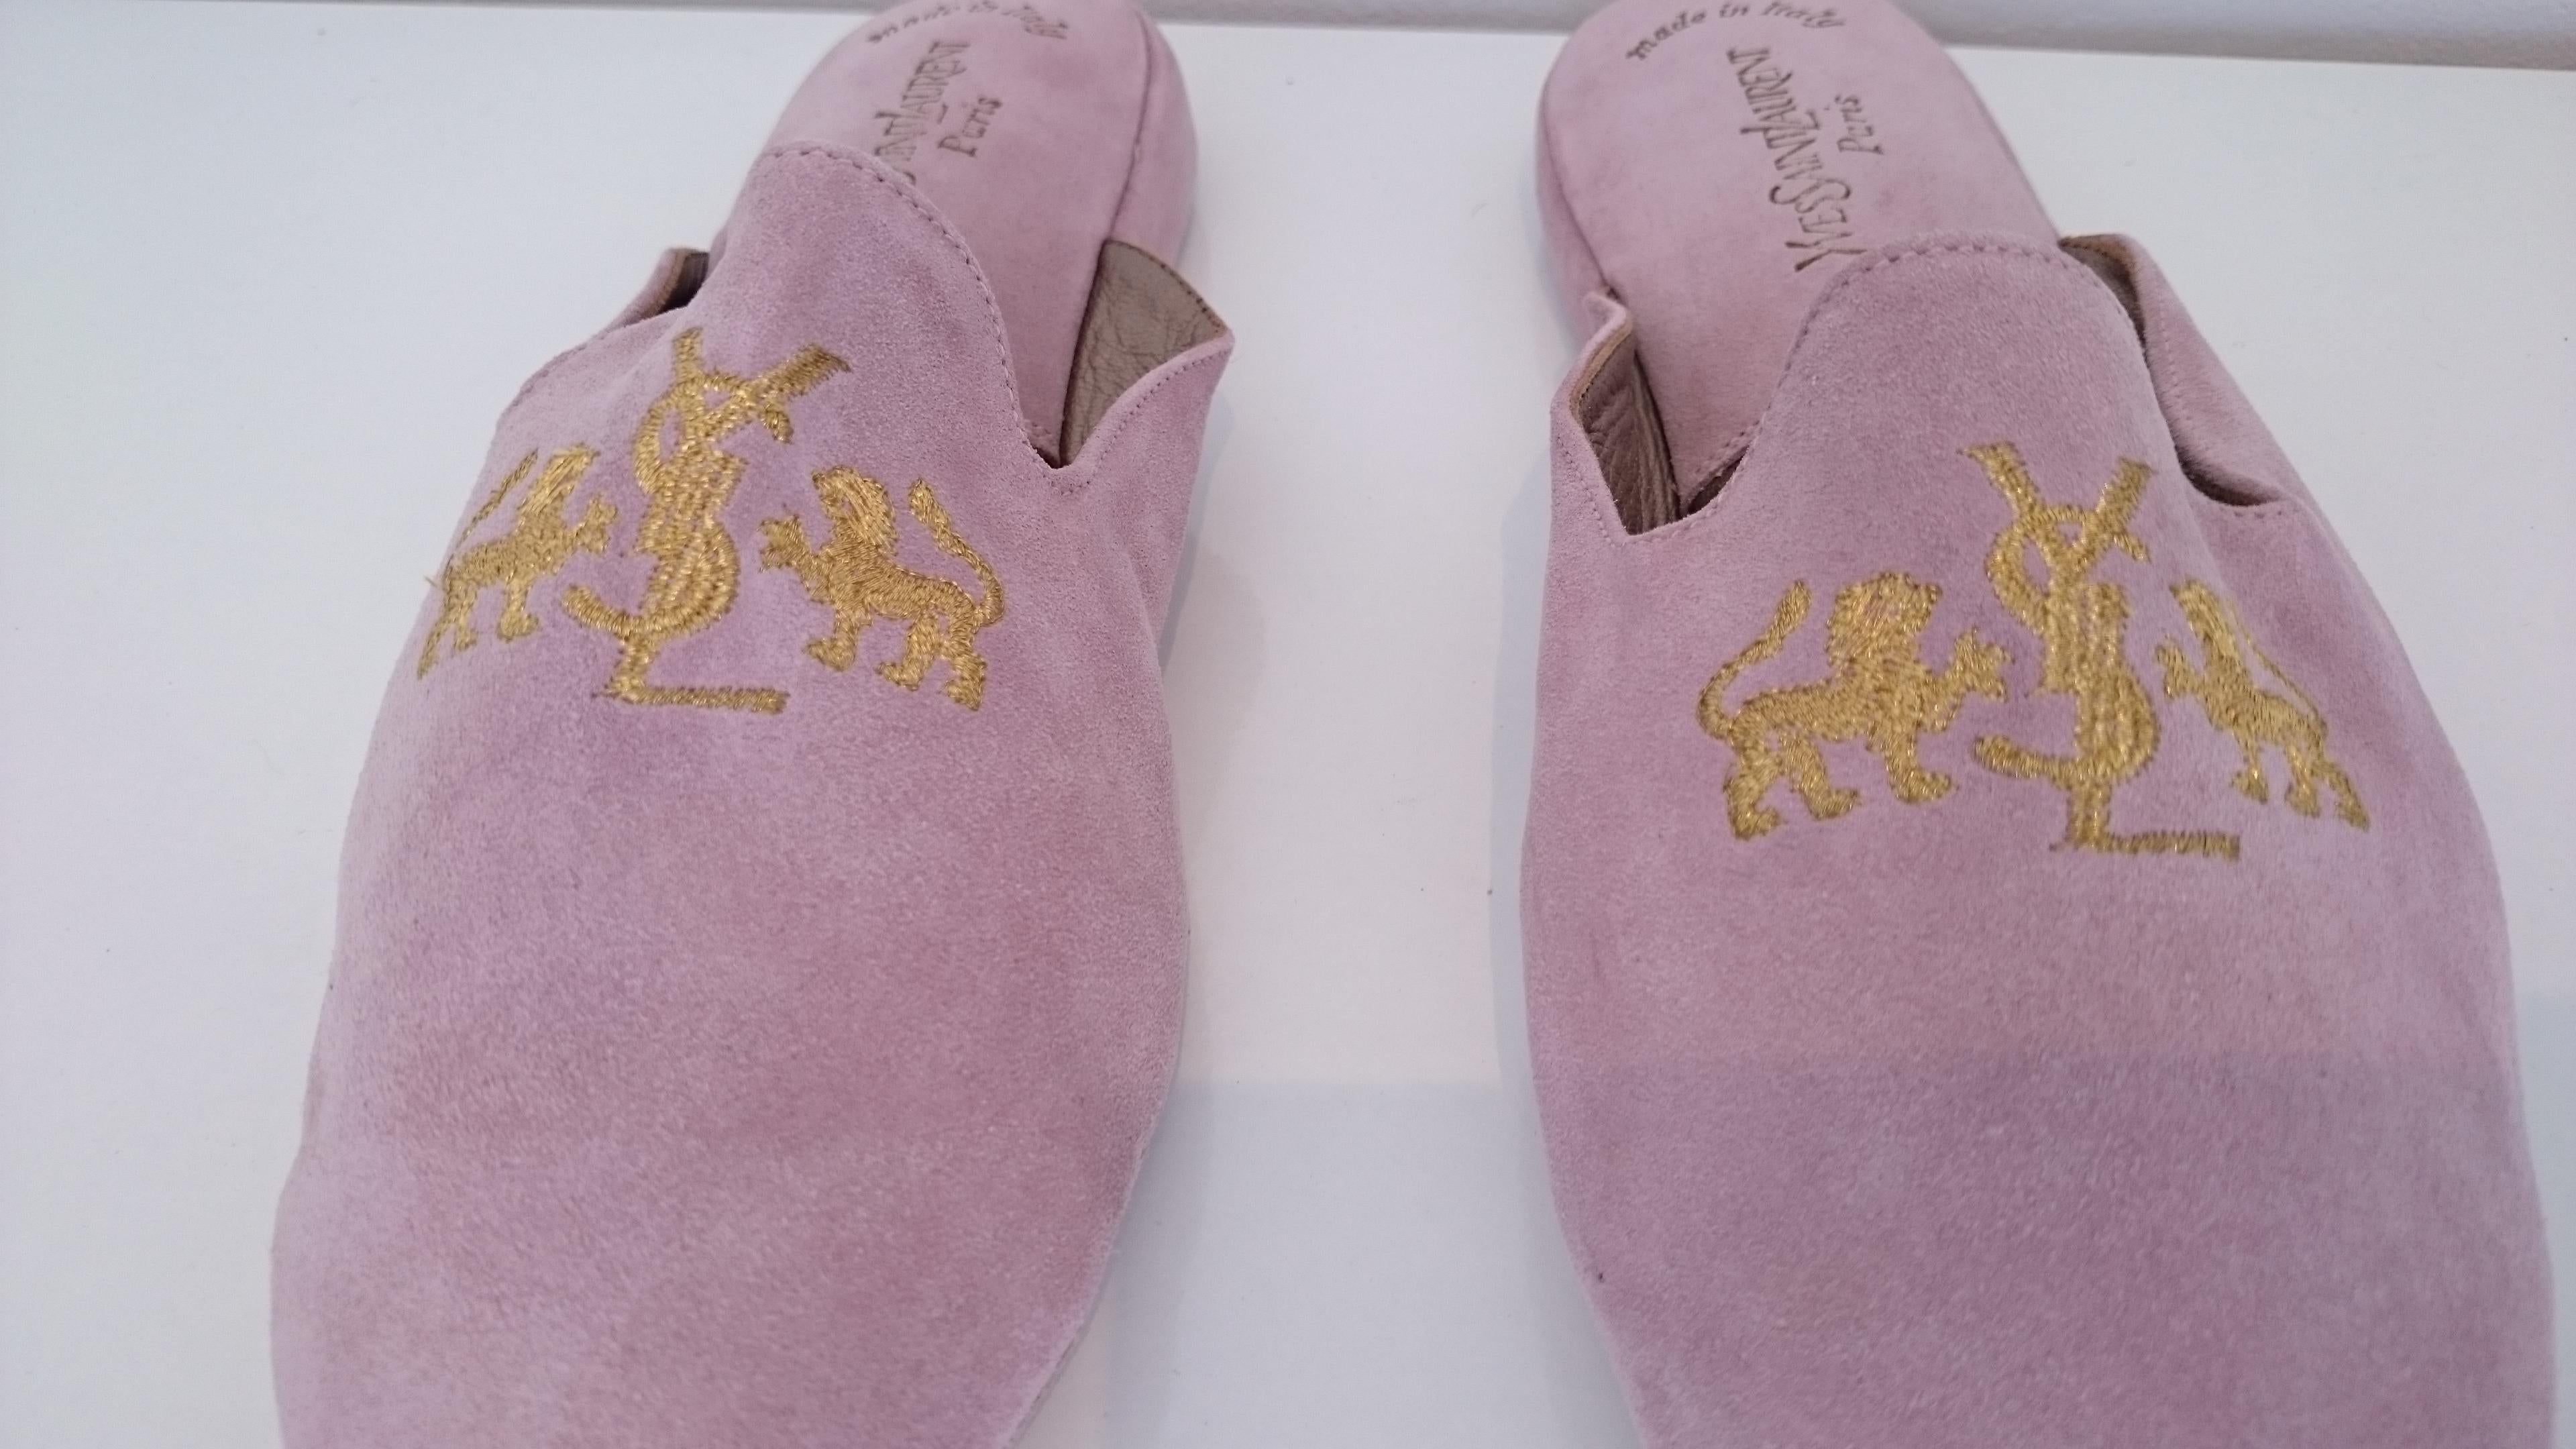 Yves Saint Laurent Pink Suede Slippers for Home. NEW. Size 10 1/2  (Grau) im Angebot